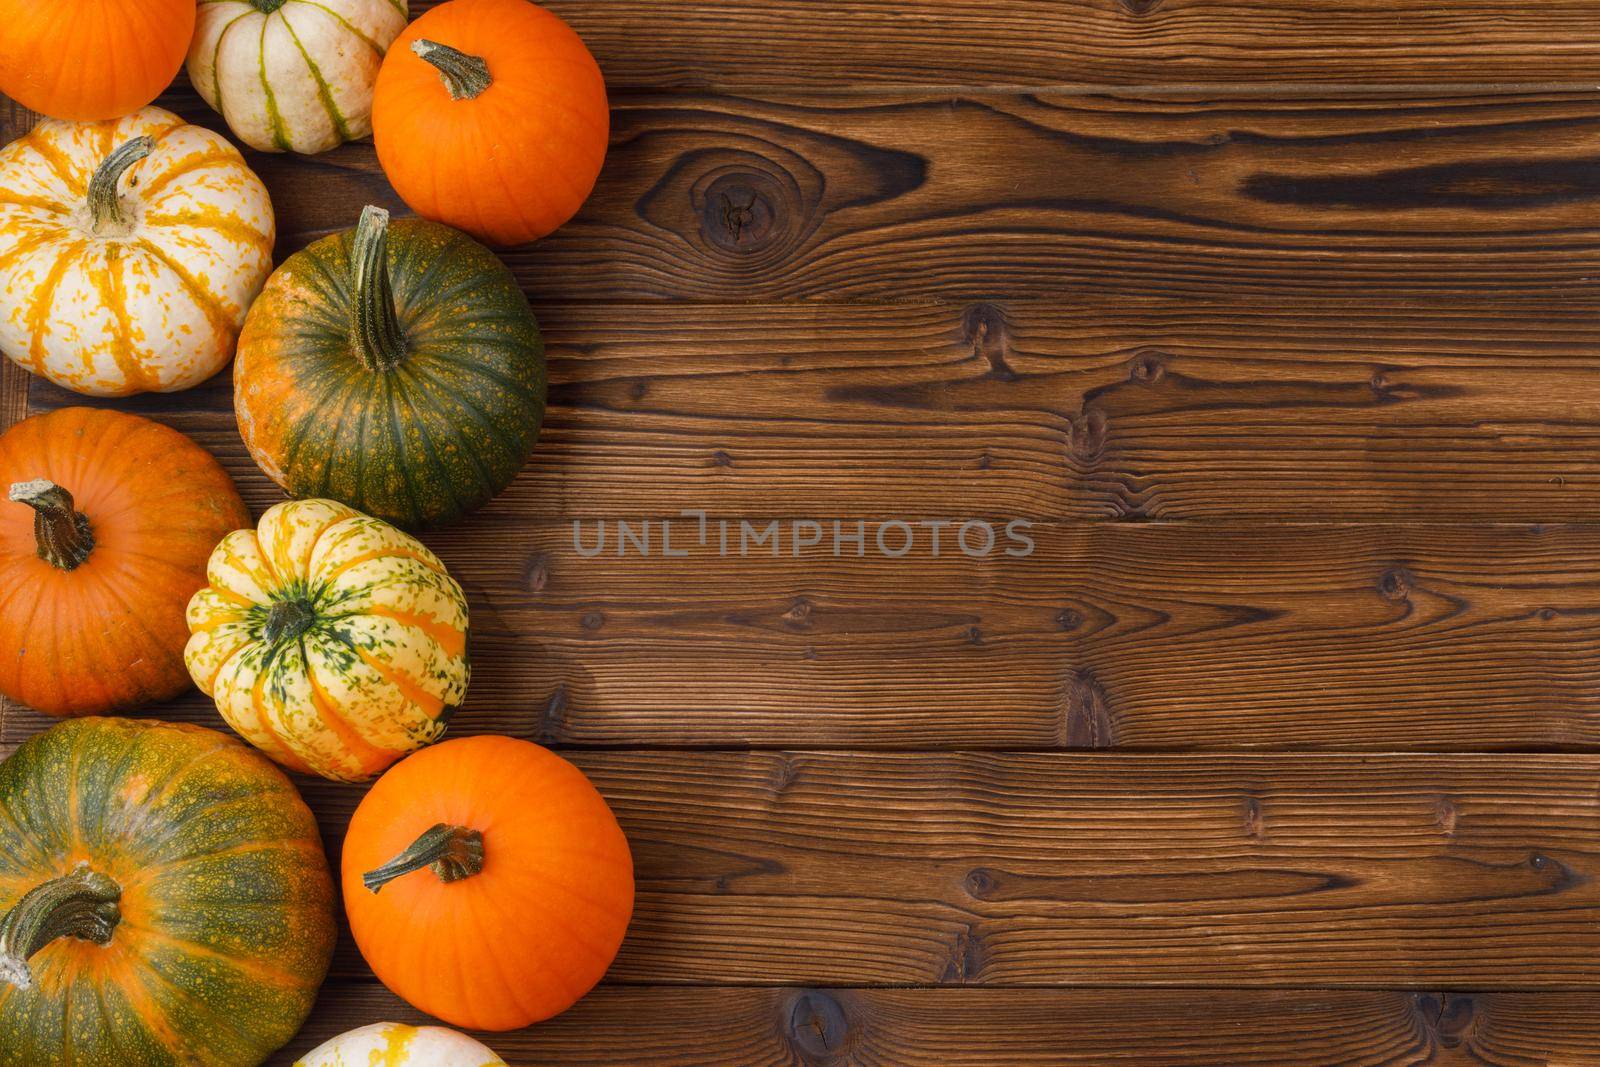 Pumpkins on wooden background by Yellowj